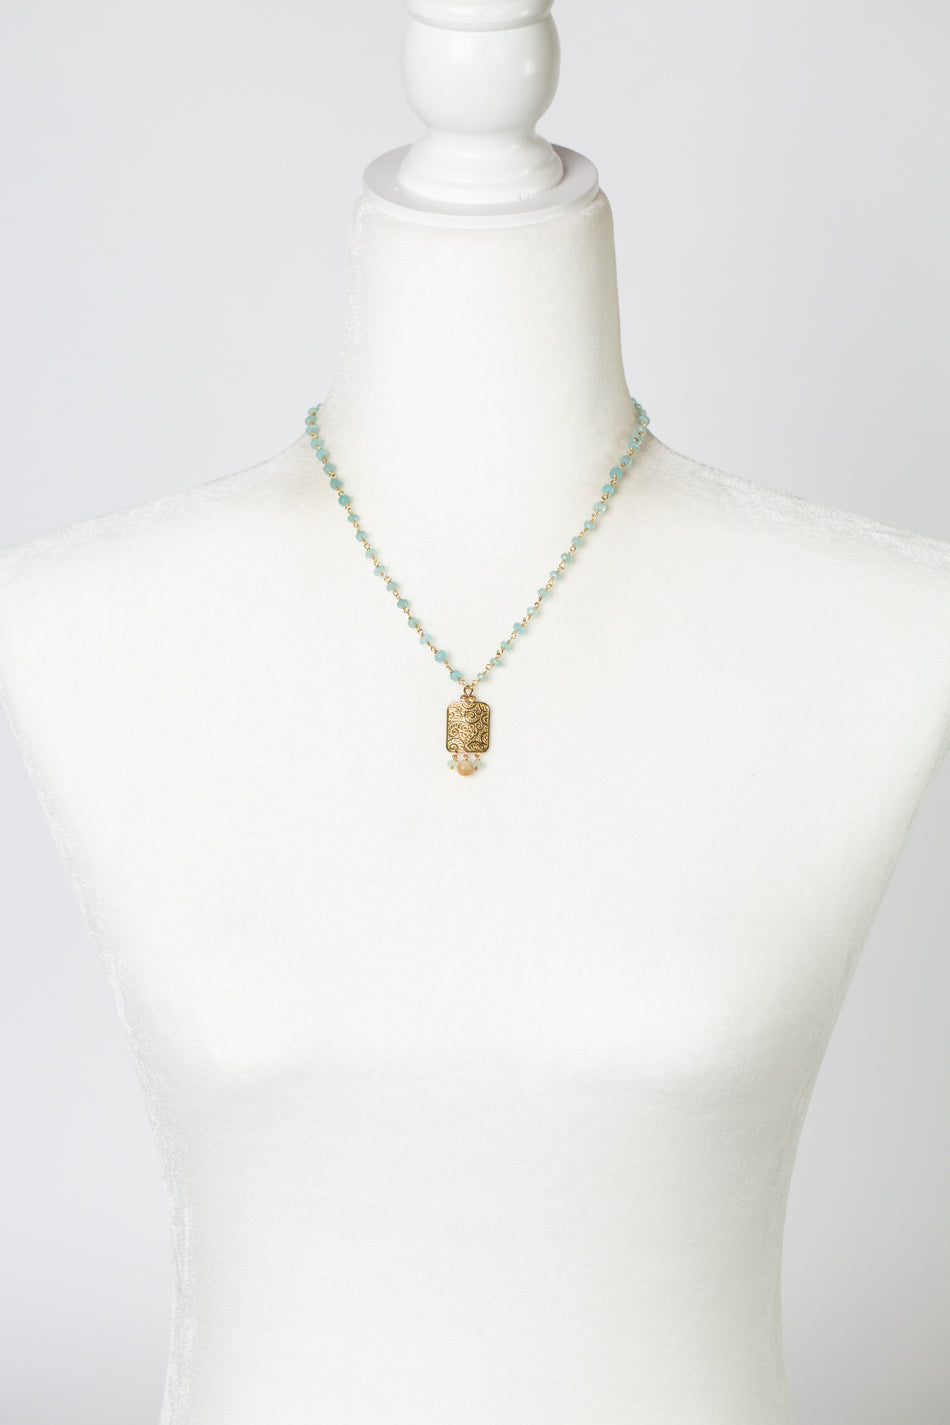 Limited Edition 16.75-18.75" Mother Of Pearl, Faceted Chalcedony With Gold Plated Silver Swirl & Flower Design Pendant Simple Necklace